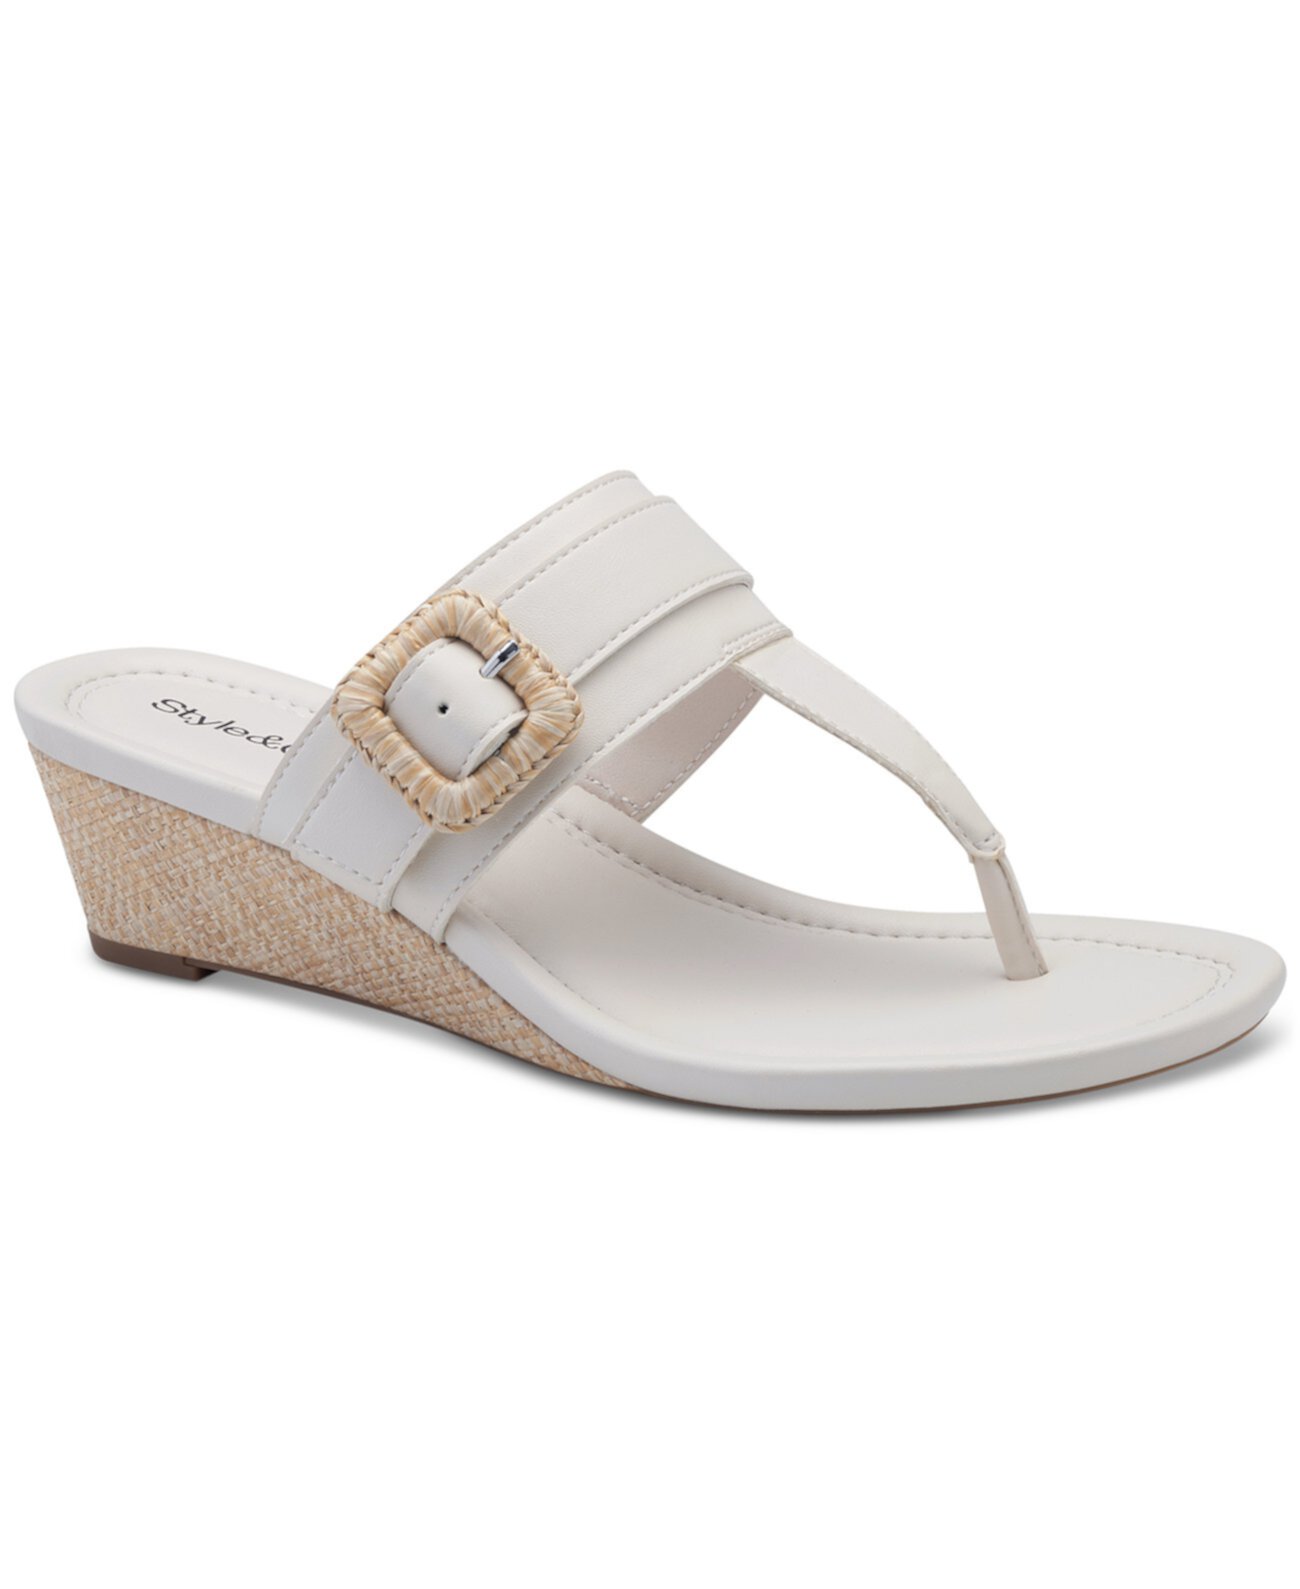 Polliee Buckled Thong Wedge Sandals, Created for Macy's Style & Co